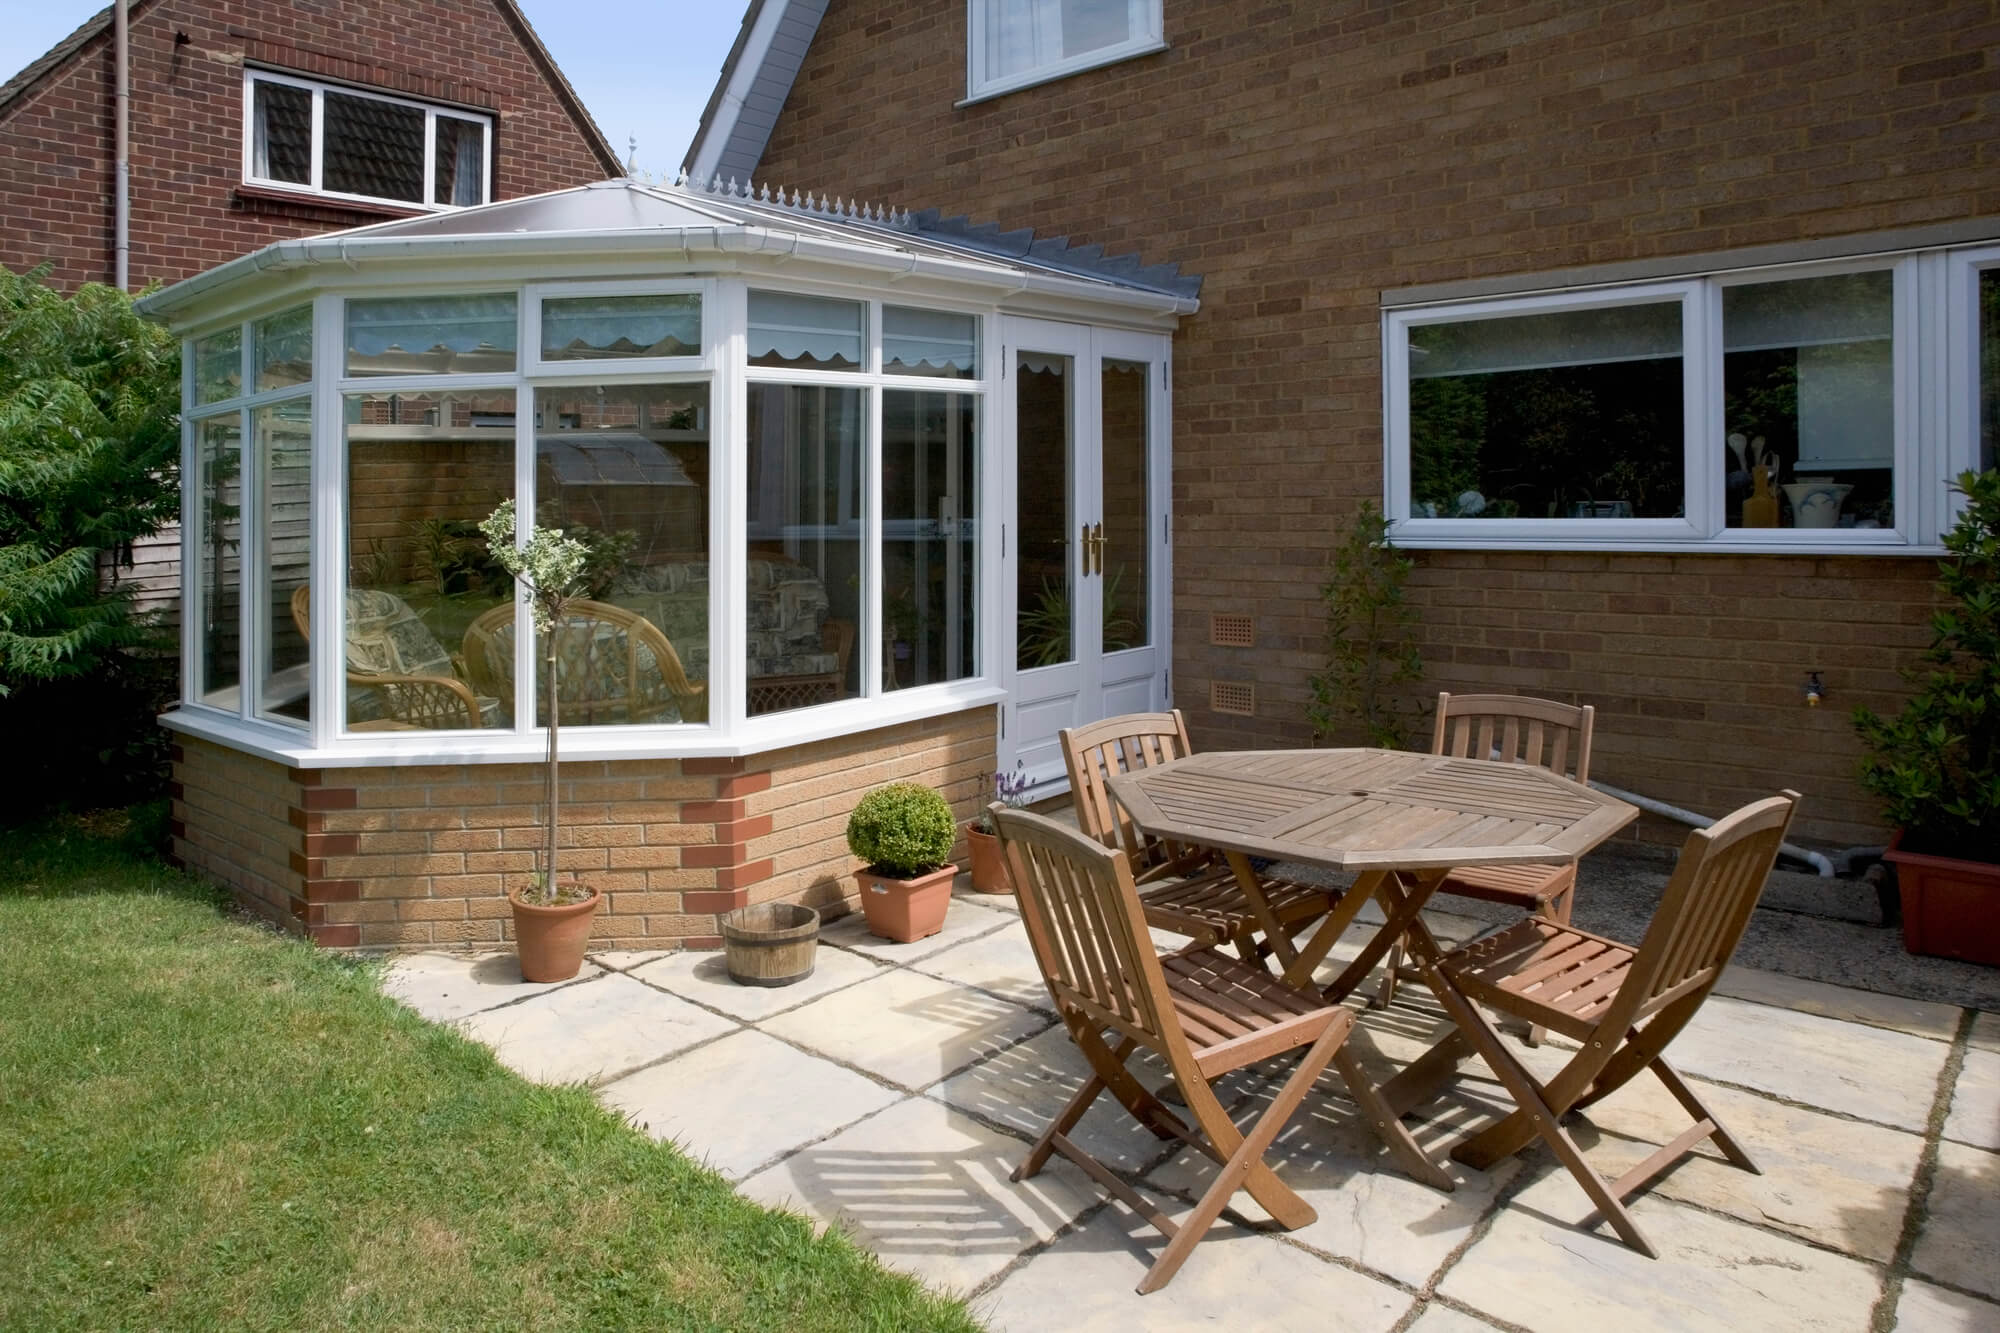 Conservatory on a stone Stone Patio